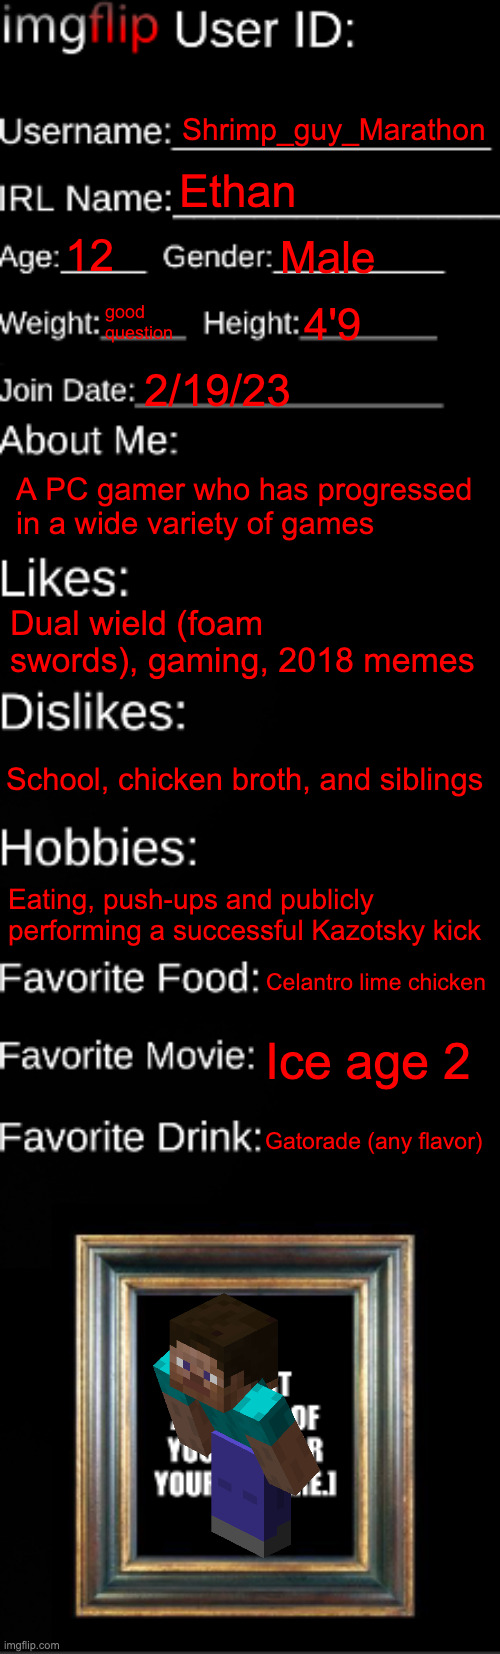 my profile | Shrimp_guy_Marathon; Ethan; 12; Male; good question; 4'9; 2/19/23; A PC gamer who has progressed in a wide variety of games; Dual wield (foam swords), gaming, 2018 memes; School, chicken broth, and siblings; Eating, push-ups and publicly performing a successful Kazotsky kick; Celantro lime chicken; Ice age 2; Gatorade (any flavor) | image tagged in imgflip id card | made w/ Imgflip meme maker